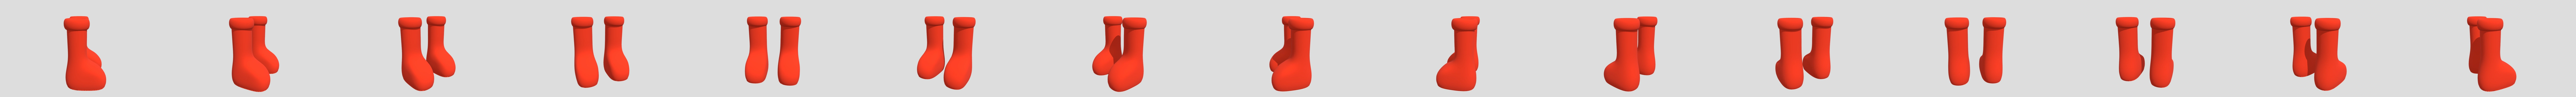 Pair of Big Red Boots - Pen and Pencil Cup Holder - Home decor - Cartoon  Boots - 3D Printed